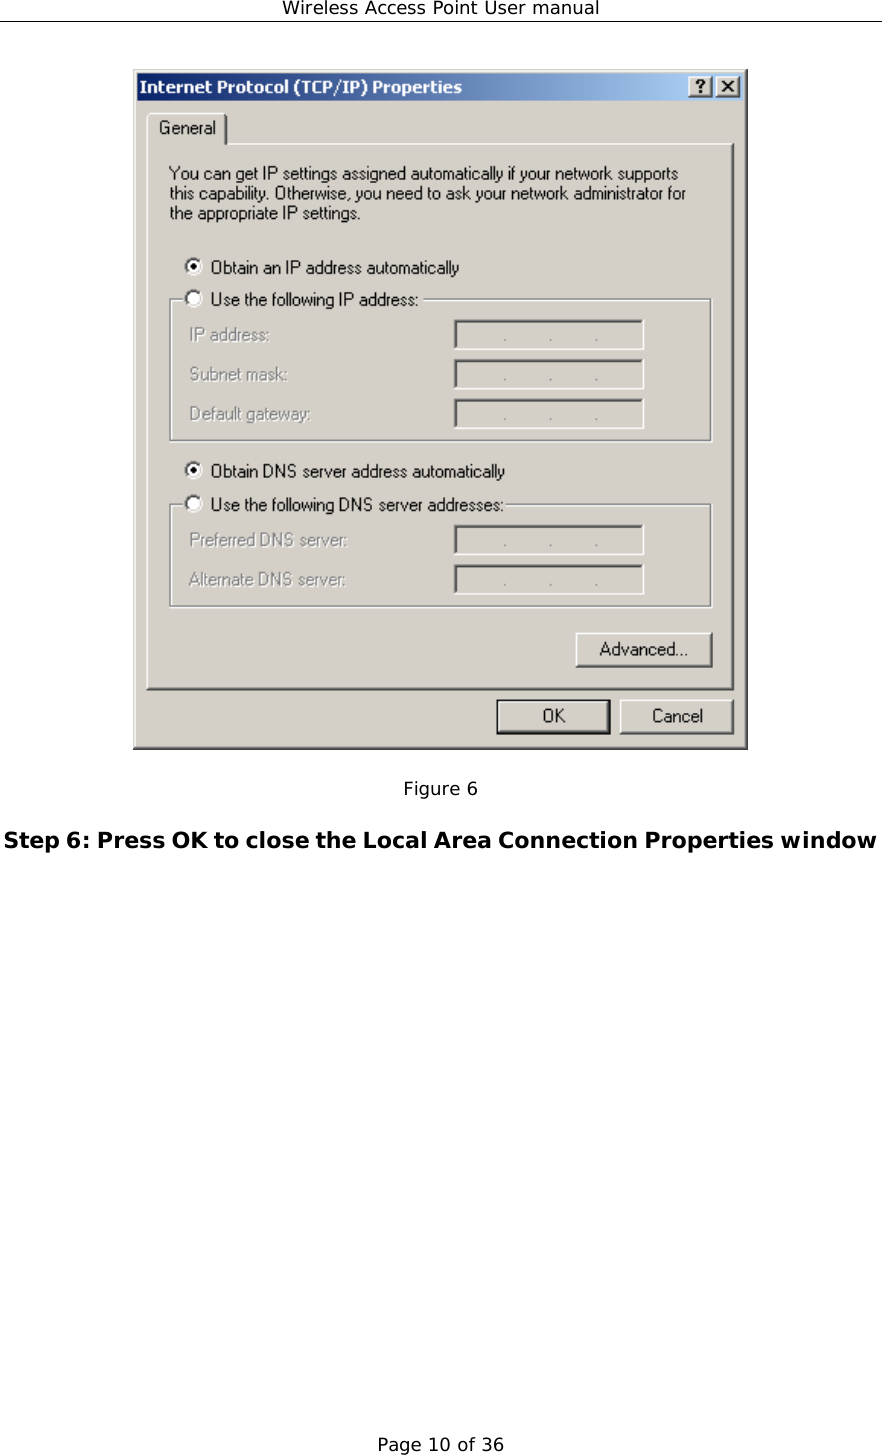 Wireless Access Point User manual Page 10 of 36   Figure 6  Step 6: Press OK to close the Local Area Connection Properties window 